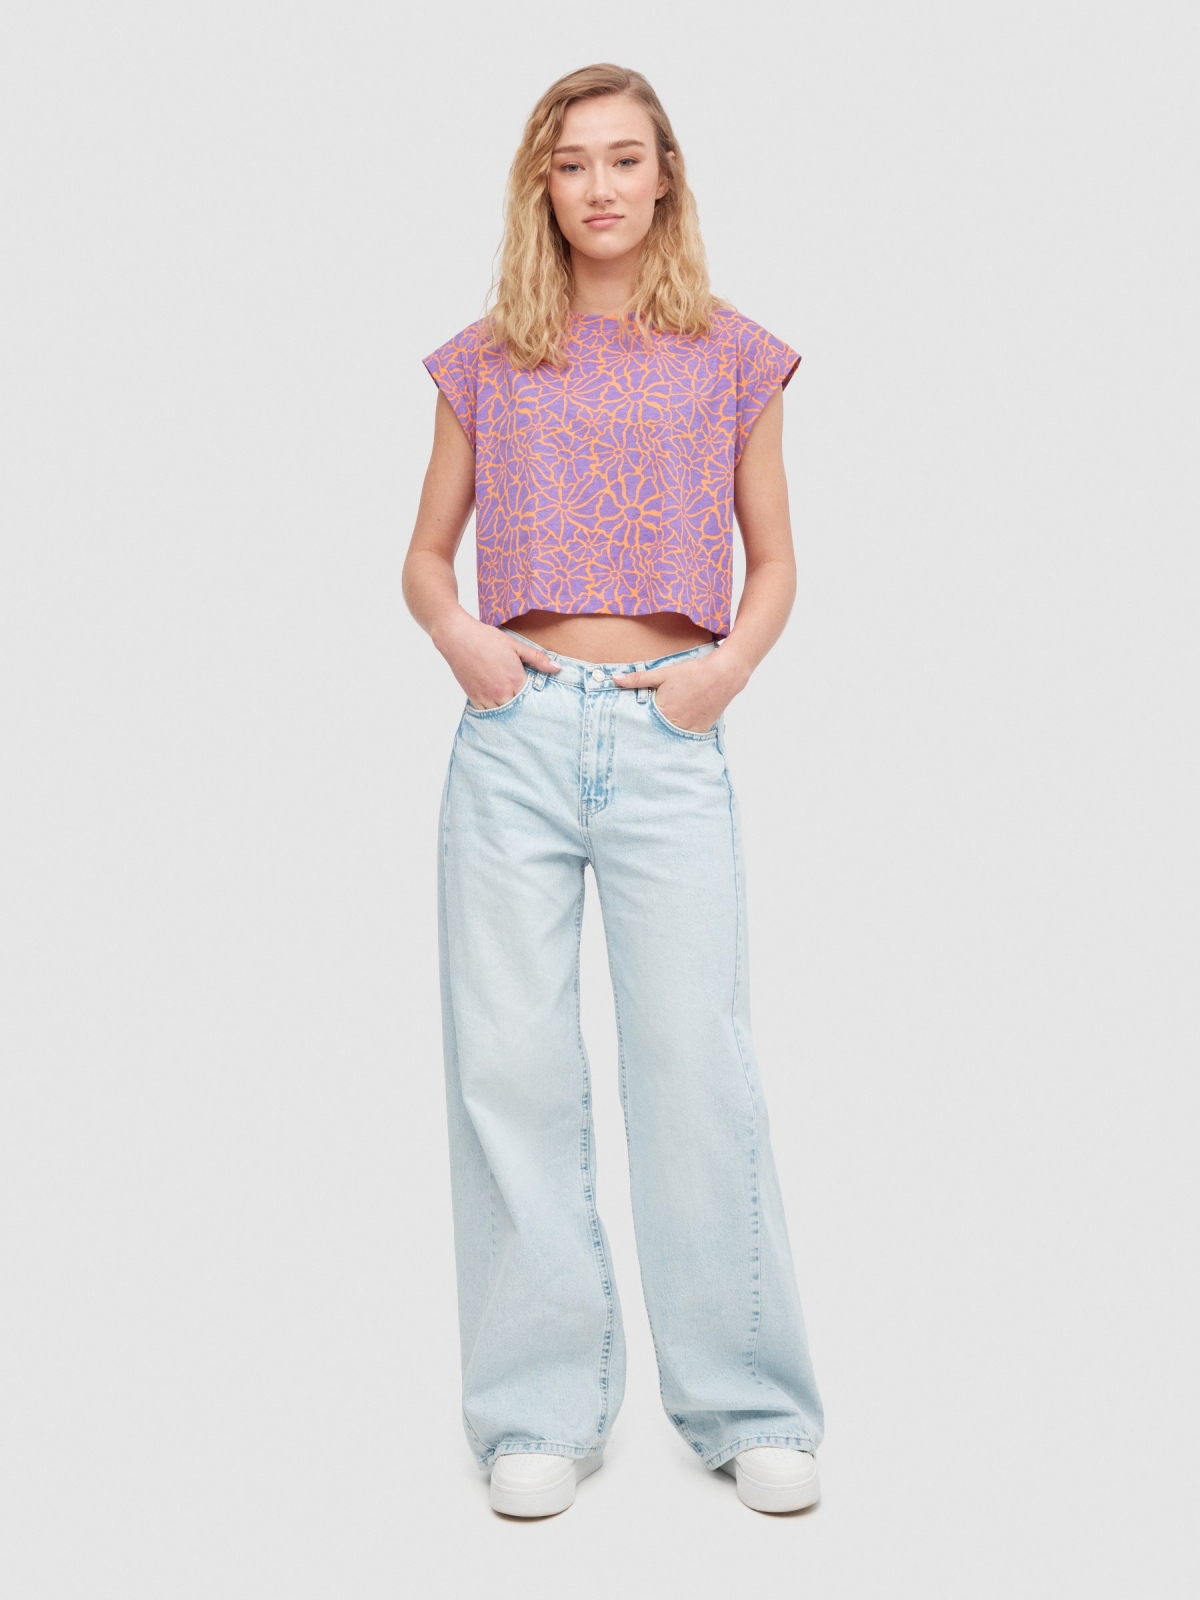 Flowers crop top lilac front view